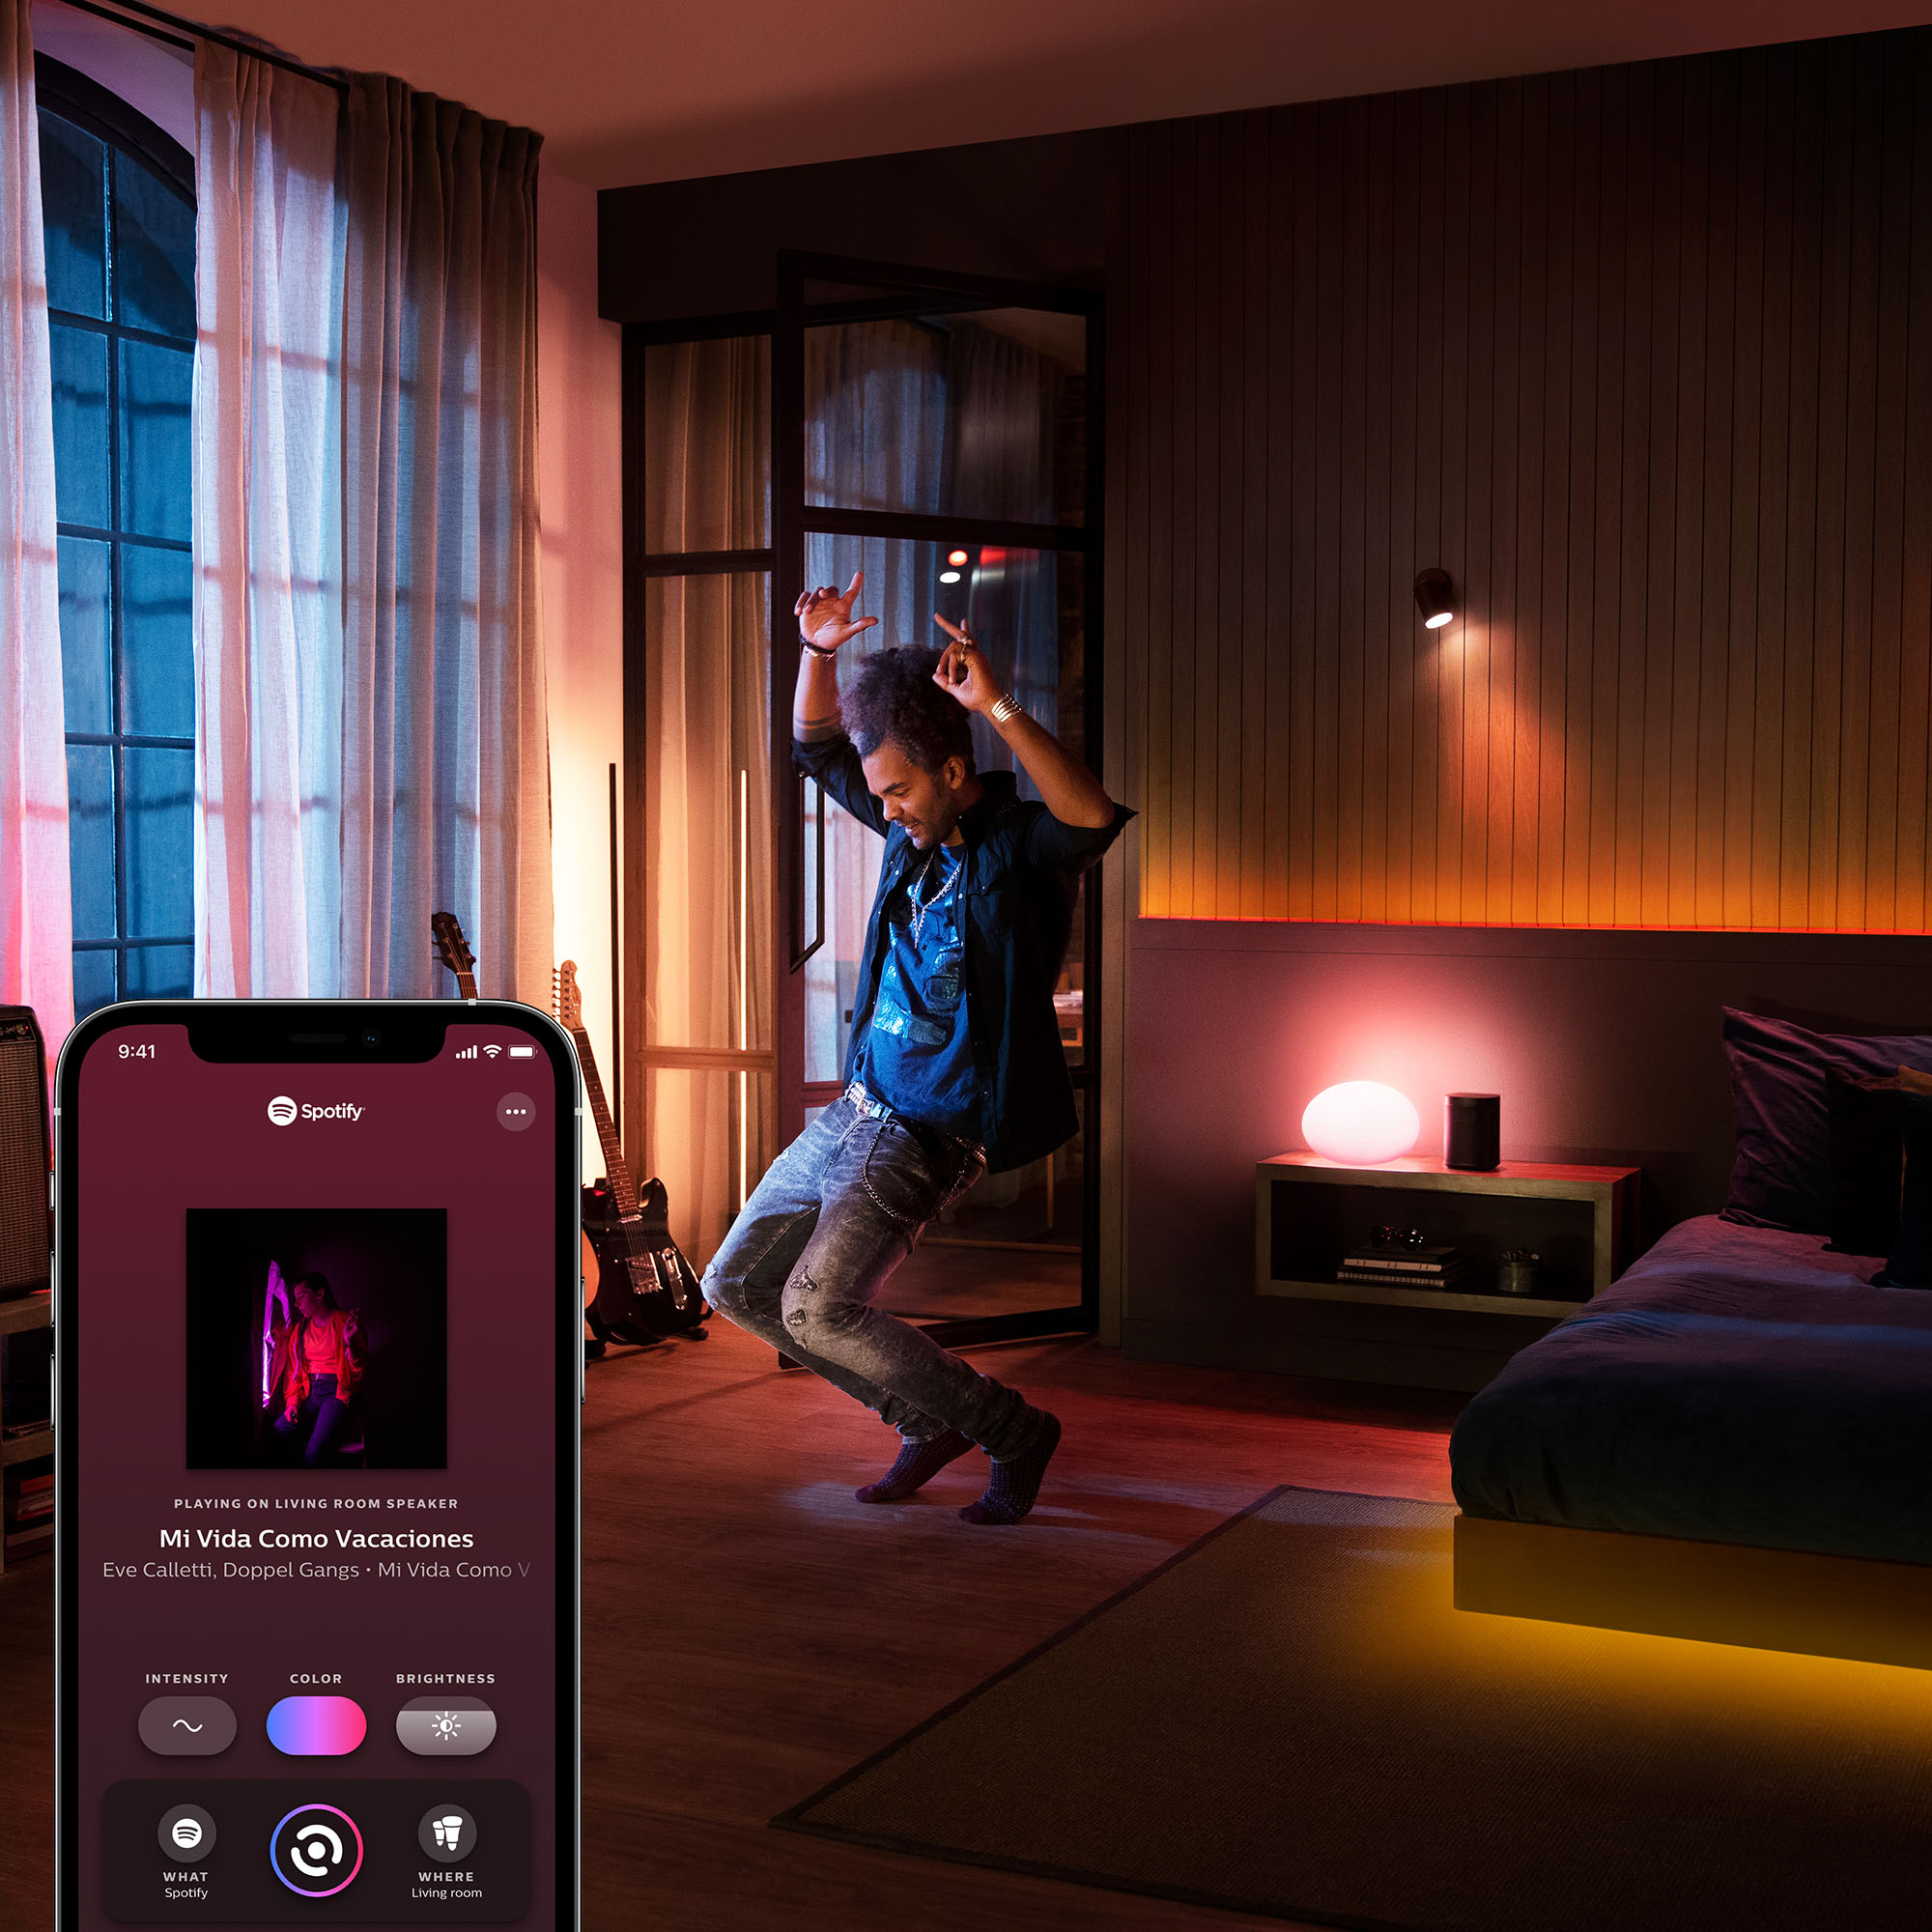 Philips Hue White & Color Ambiance BR30 LED Smart Bulbs, 2 Bulbs (578096) &  Smart Dimmer Switch, 1-Pack & Bridge, Unlocks Full Suite of Features